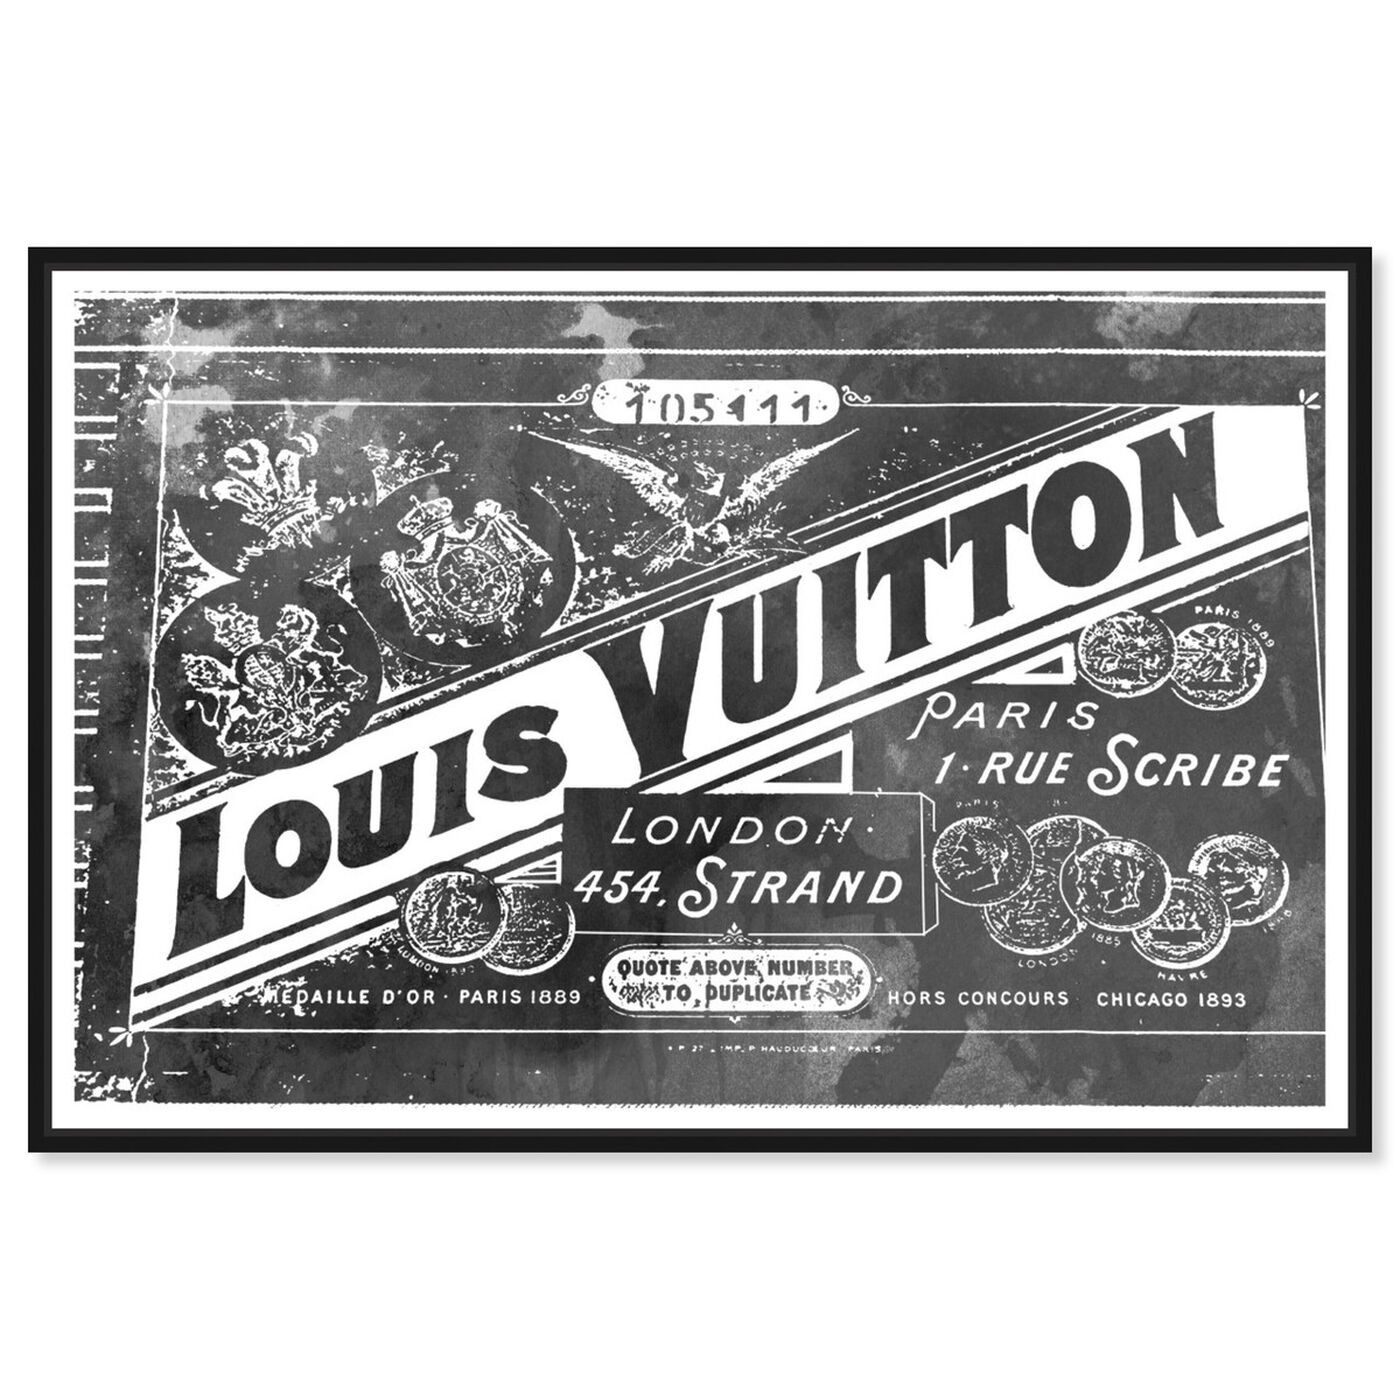 louis vuitton poster for bedroom